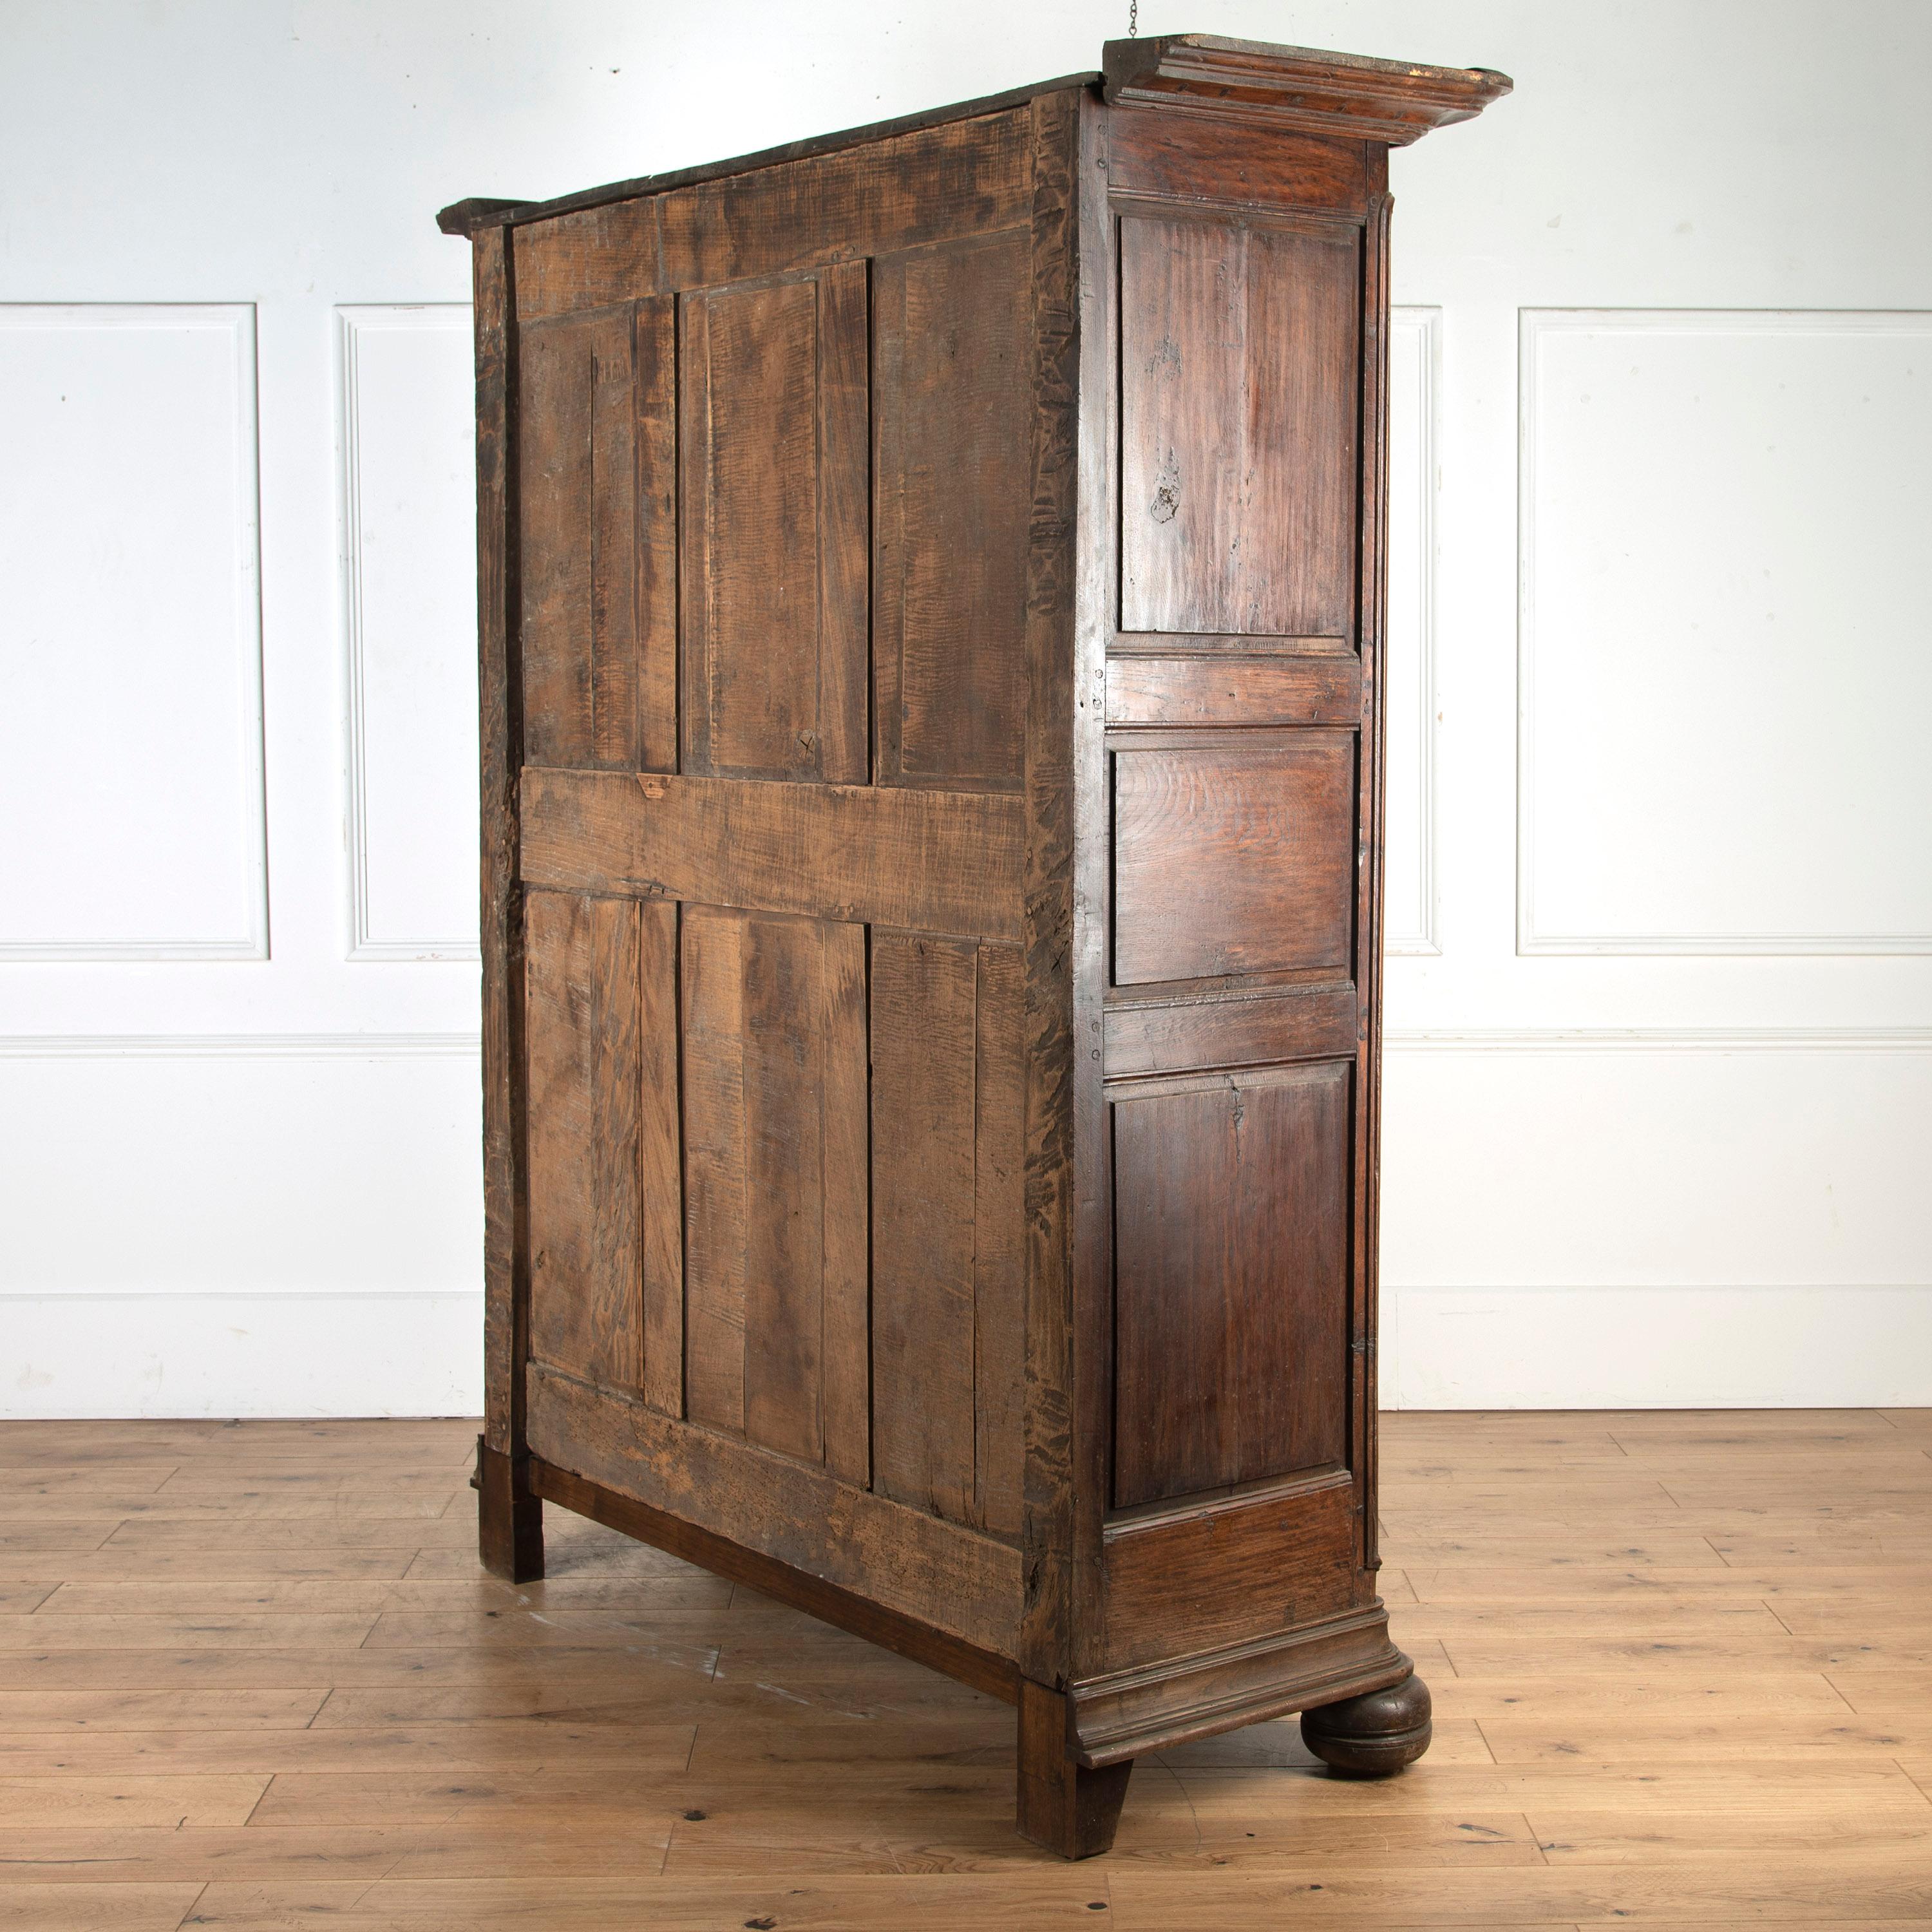 Imposing French oak armoire, circa 1840.

Standing on bun feet with decorative fielded panels and large hinges. The cornice and base plinth is separate from the main body of the wardrobe, making it easier for transportation.

Featuring its